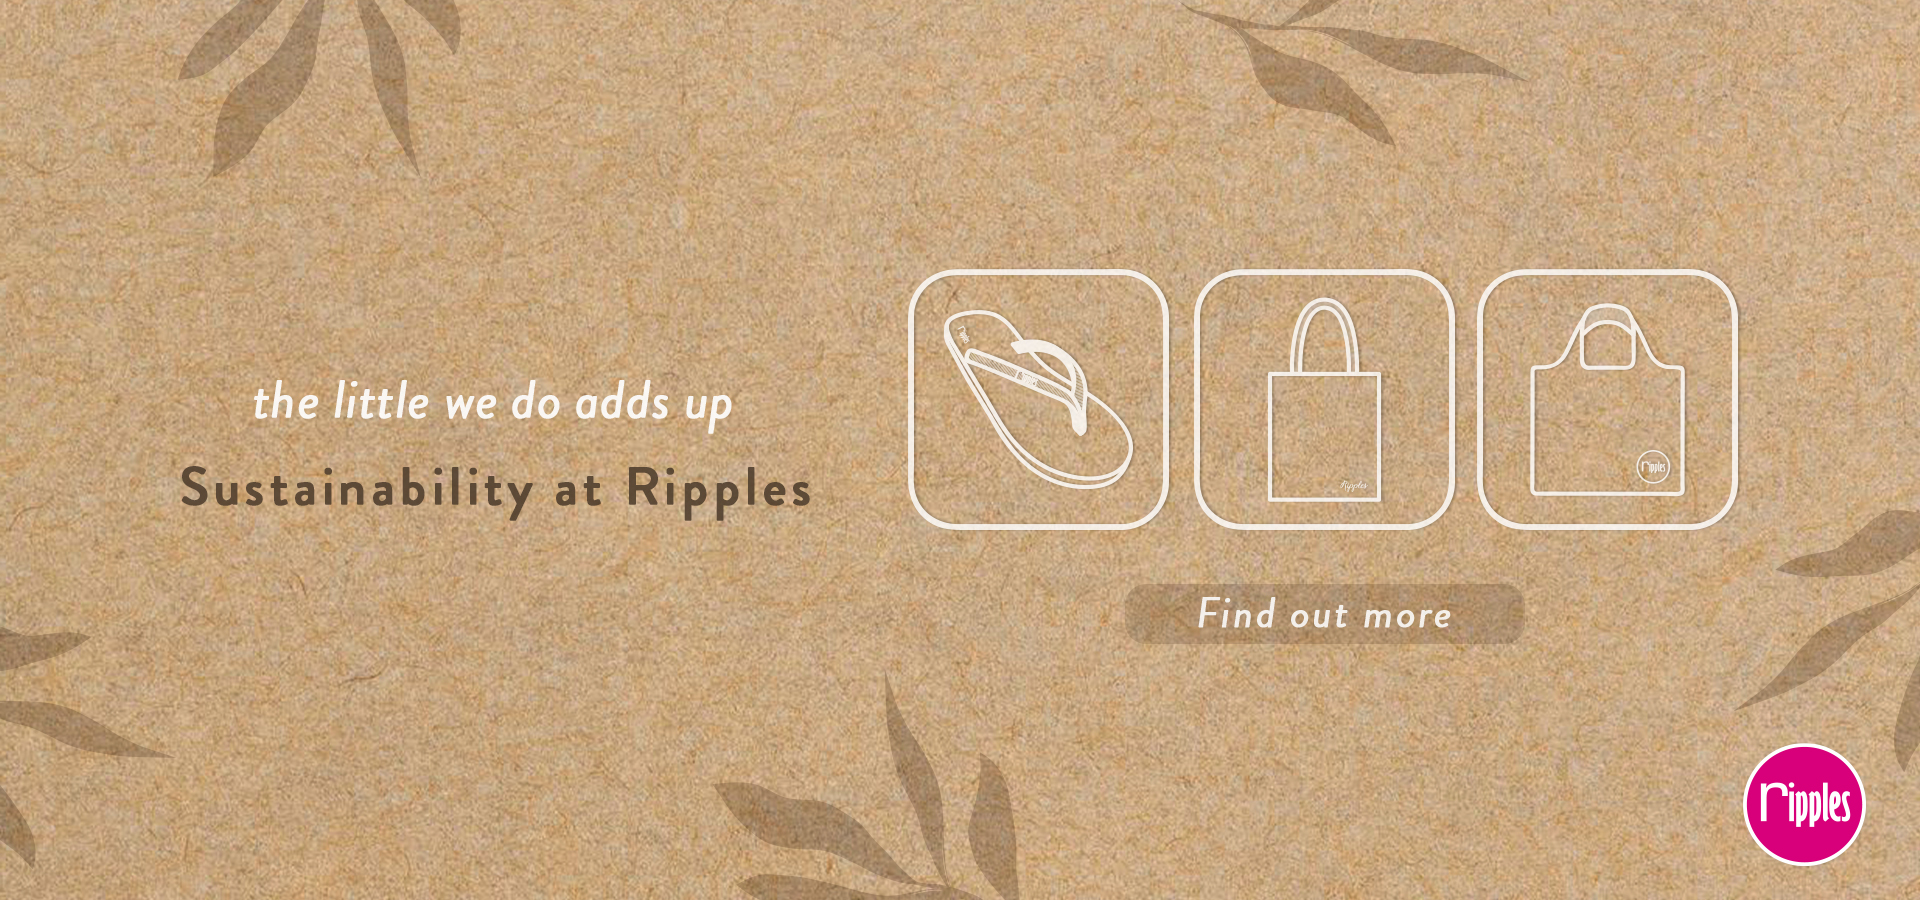 Sustainability at Ripples